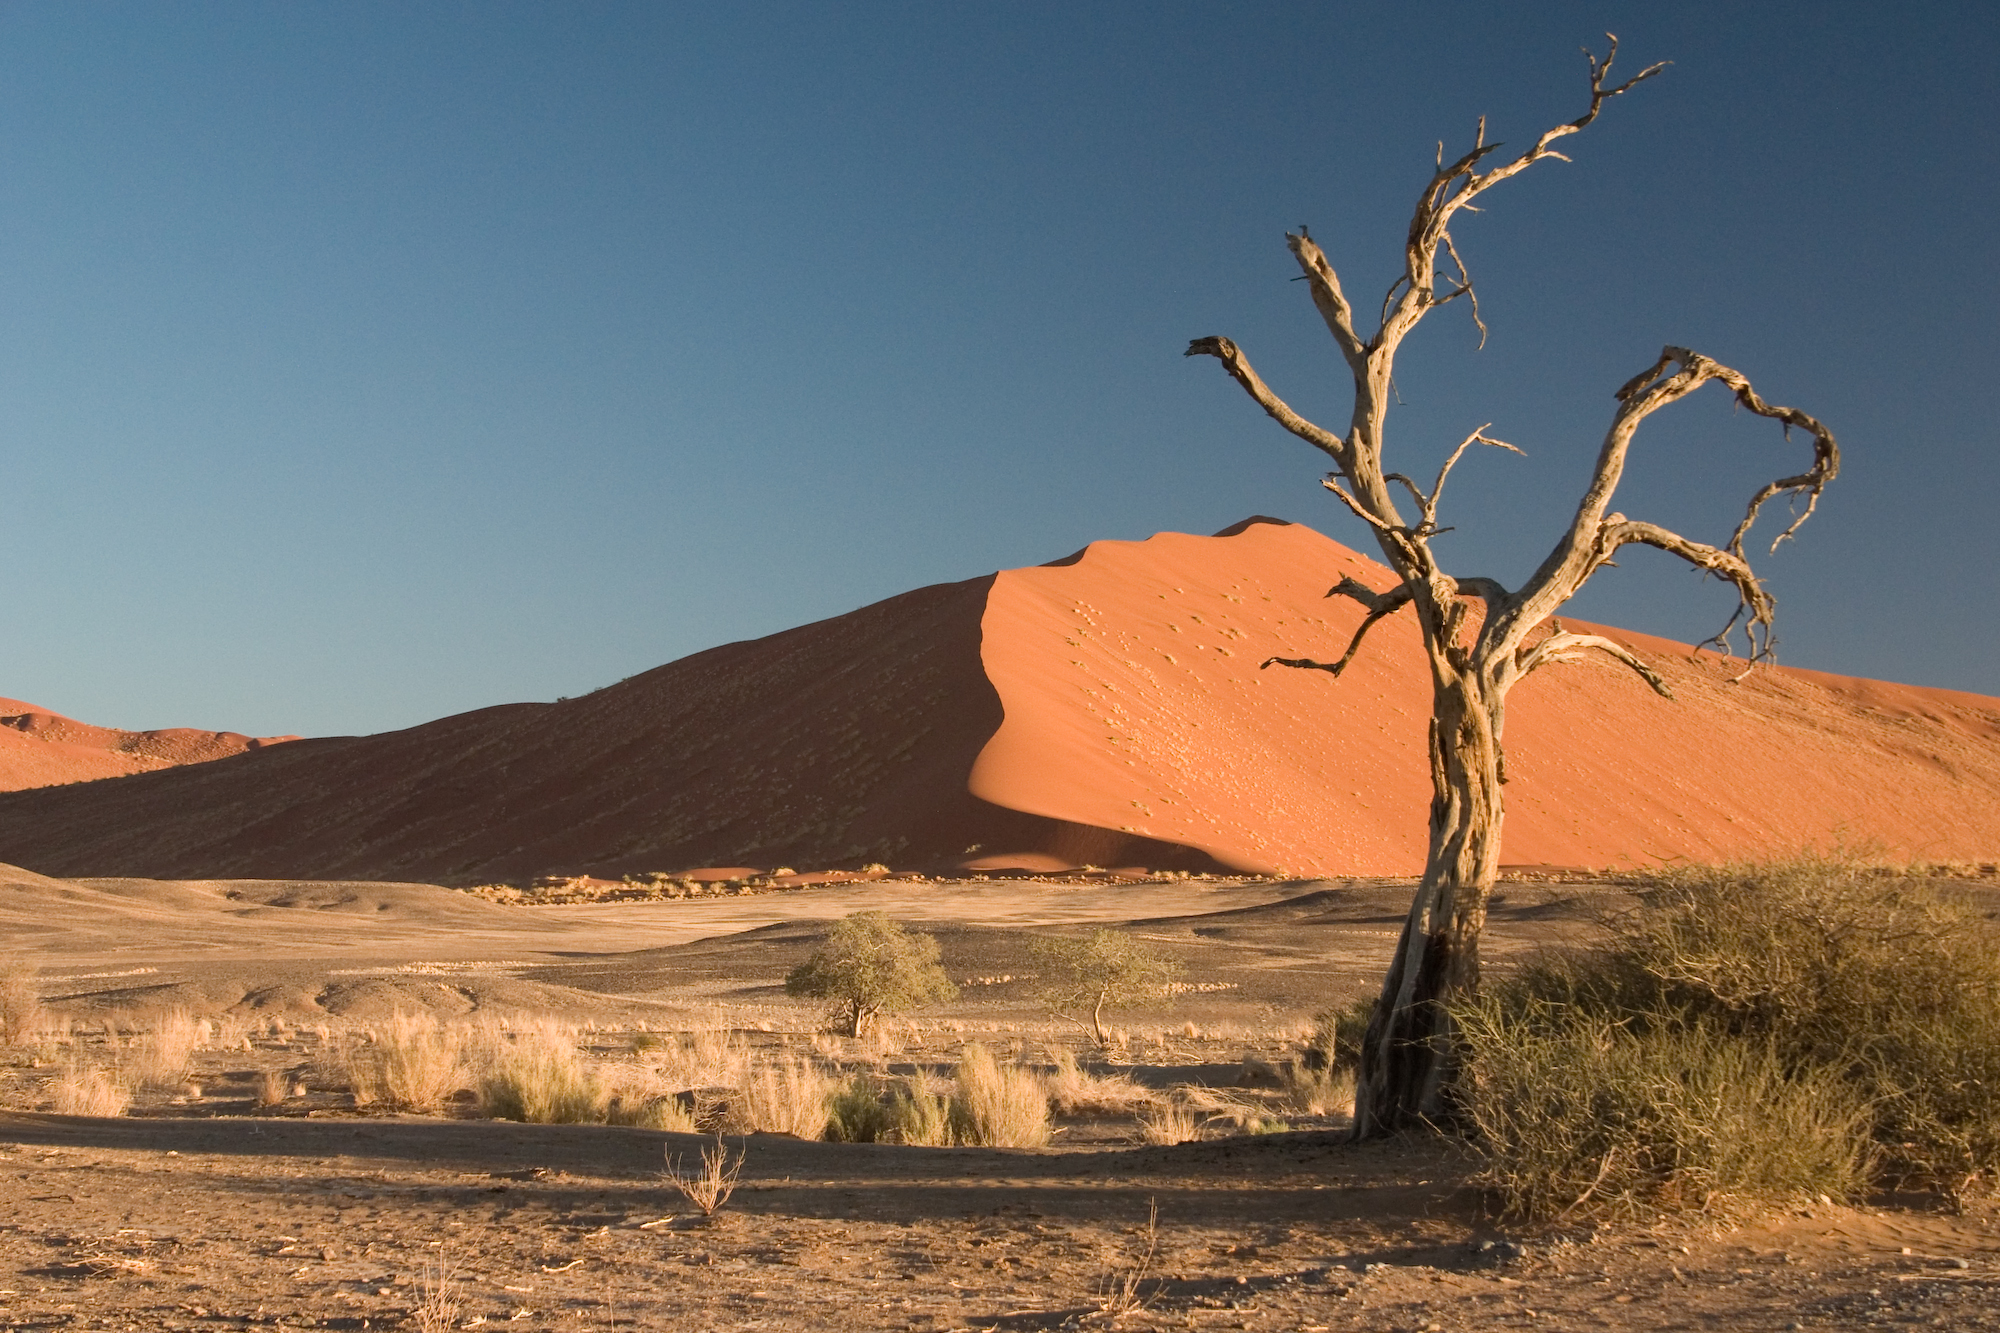 The Camel Thorn Tree (Acacia erioloba) in the Namib Desert is nearly leafless in dry periods.